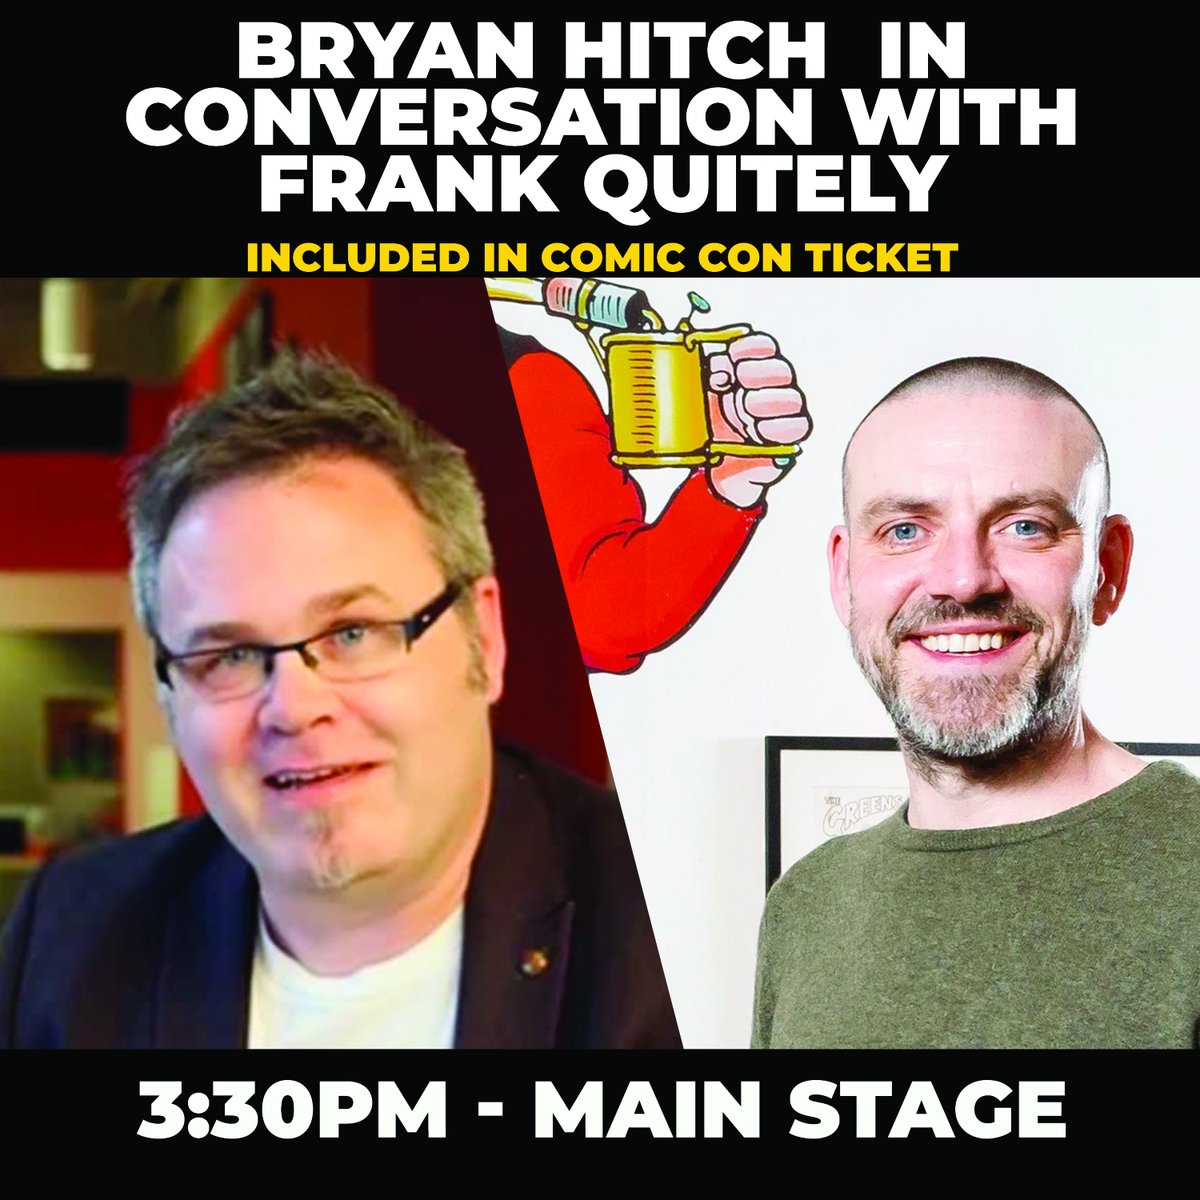 Have we got some treats for you! Full wk long schedule drops tomorrow in a bumper size commemorative show guide. Sneak peek, @THEBRYANHITCH is headlining the main stage in conversation with @frankquitely1 Learn more: tinyurl.com/4m8a8z6u #glasgowcomiccon #glasgow #comiccon